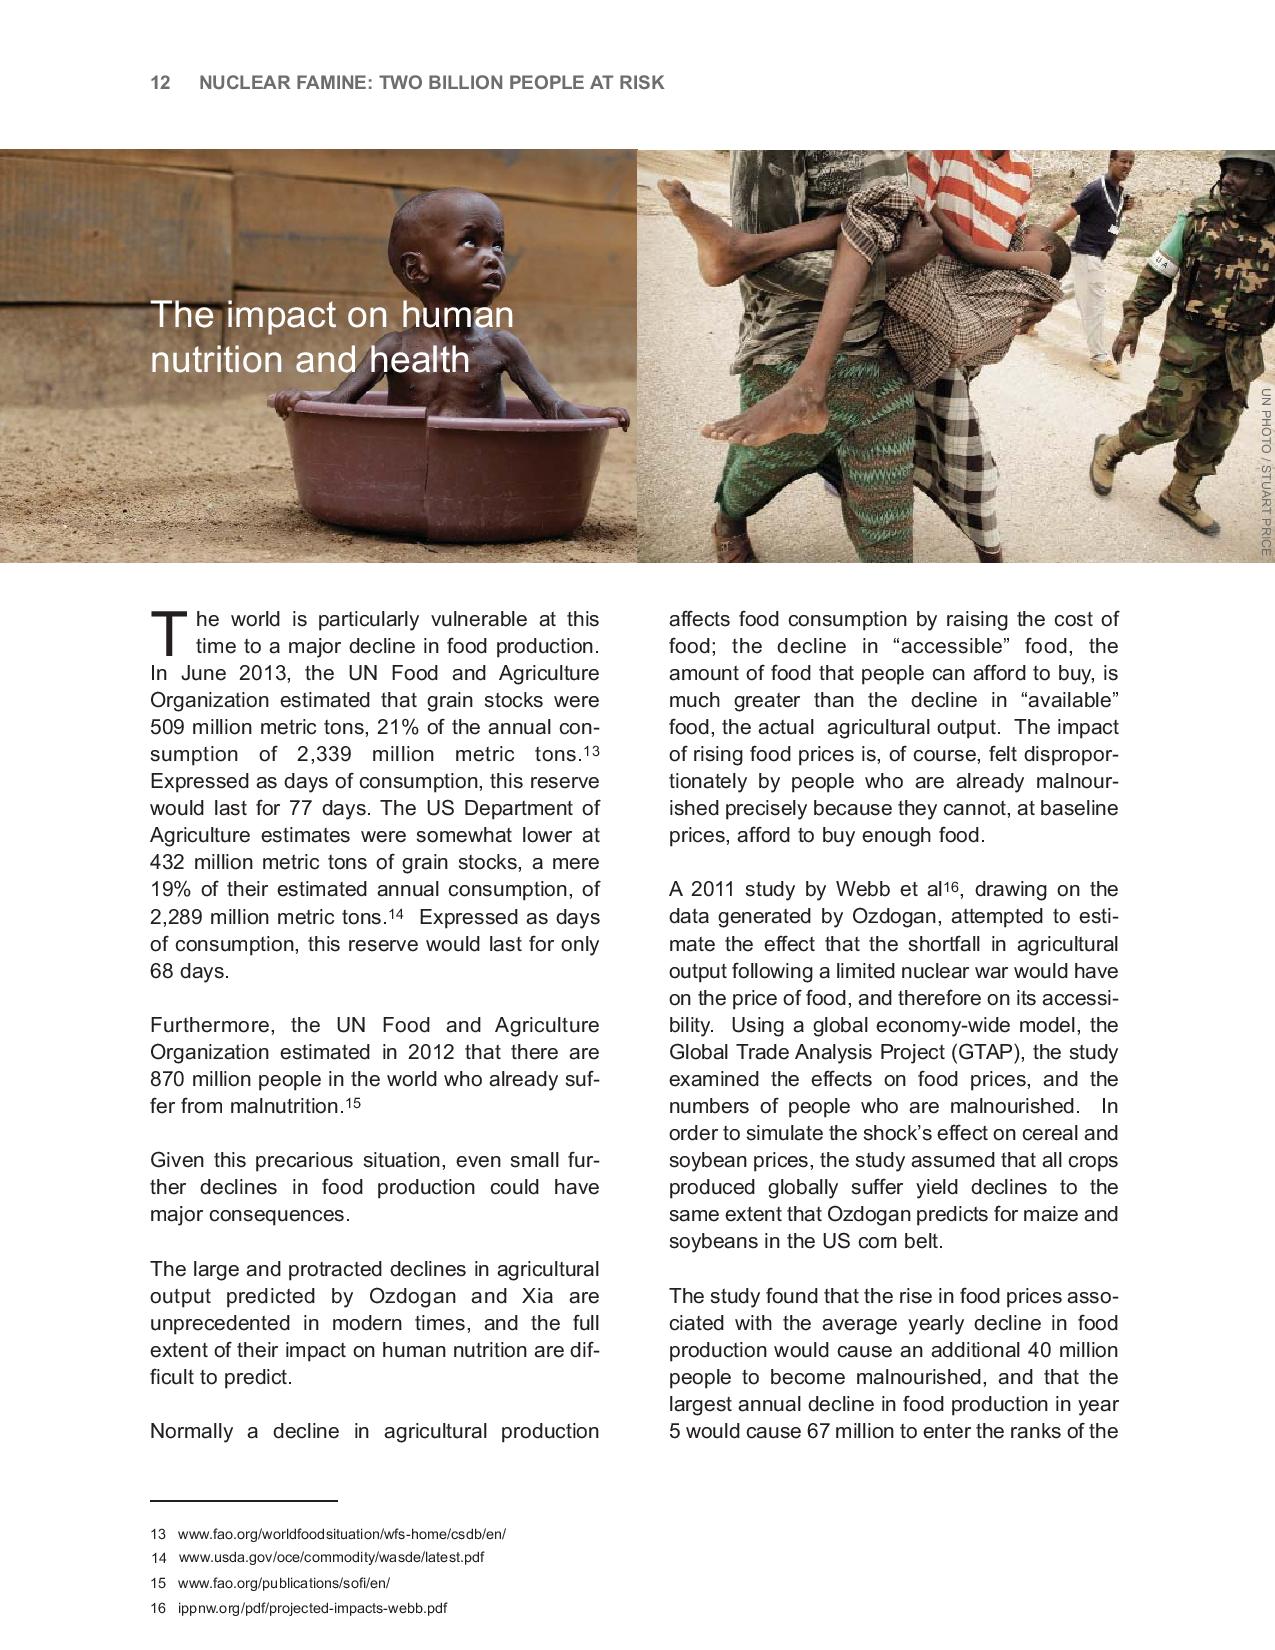 nuclear-famine-two-billion-at-risk-2013-page-014.jpg